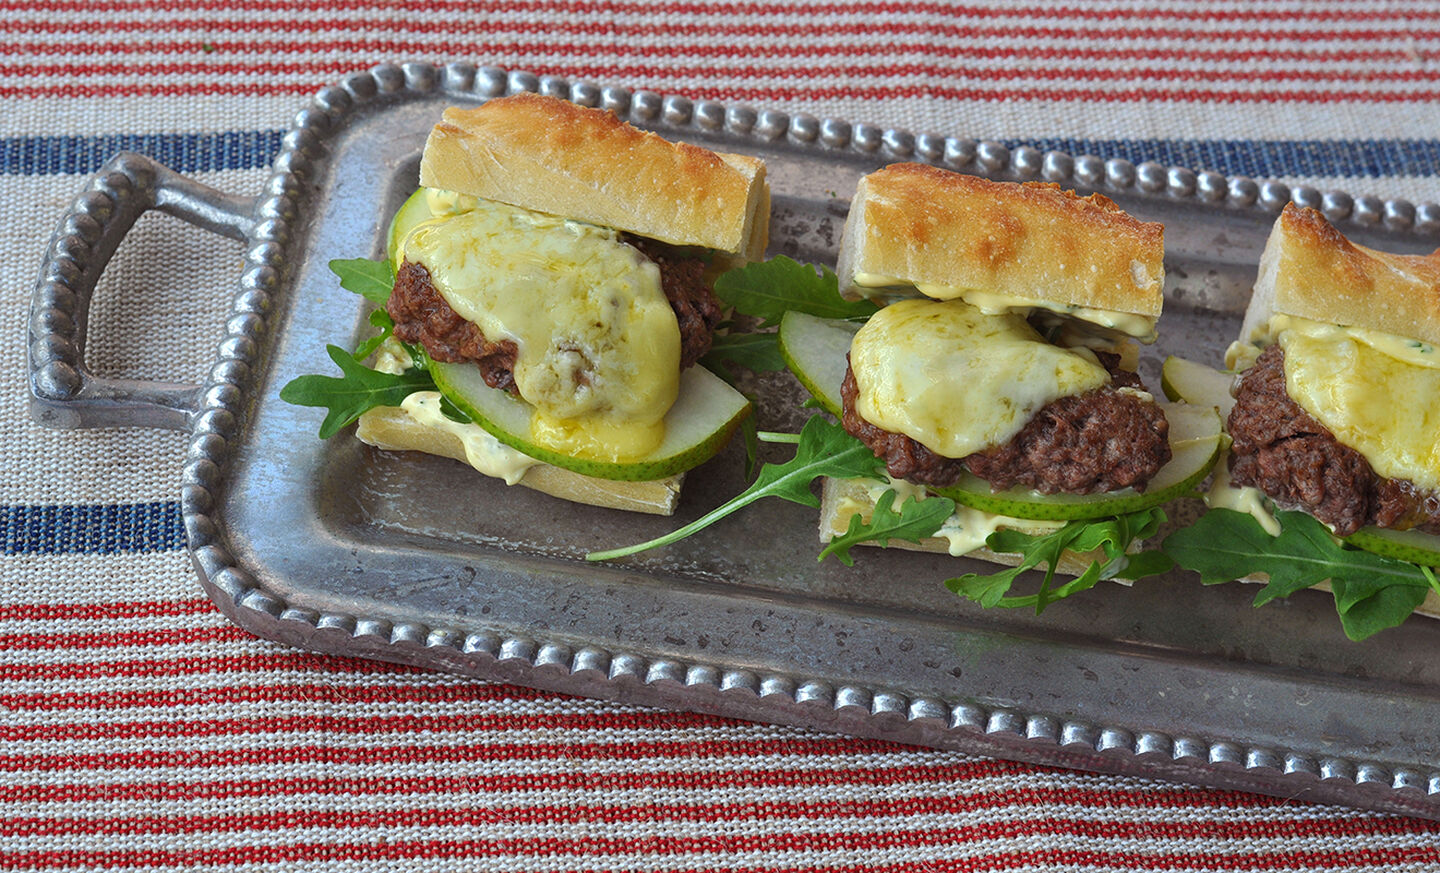 Wagyu Burger Sliders with Melted Raclette Recipe | D’Artagnan